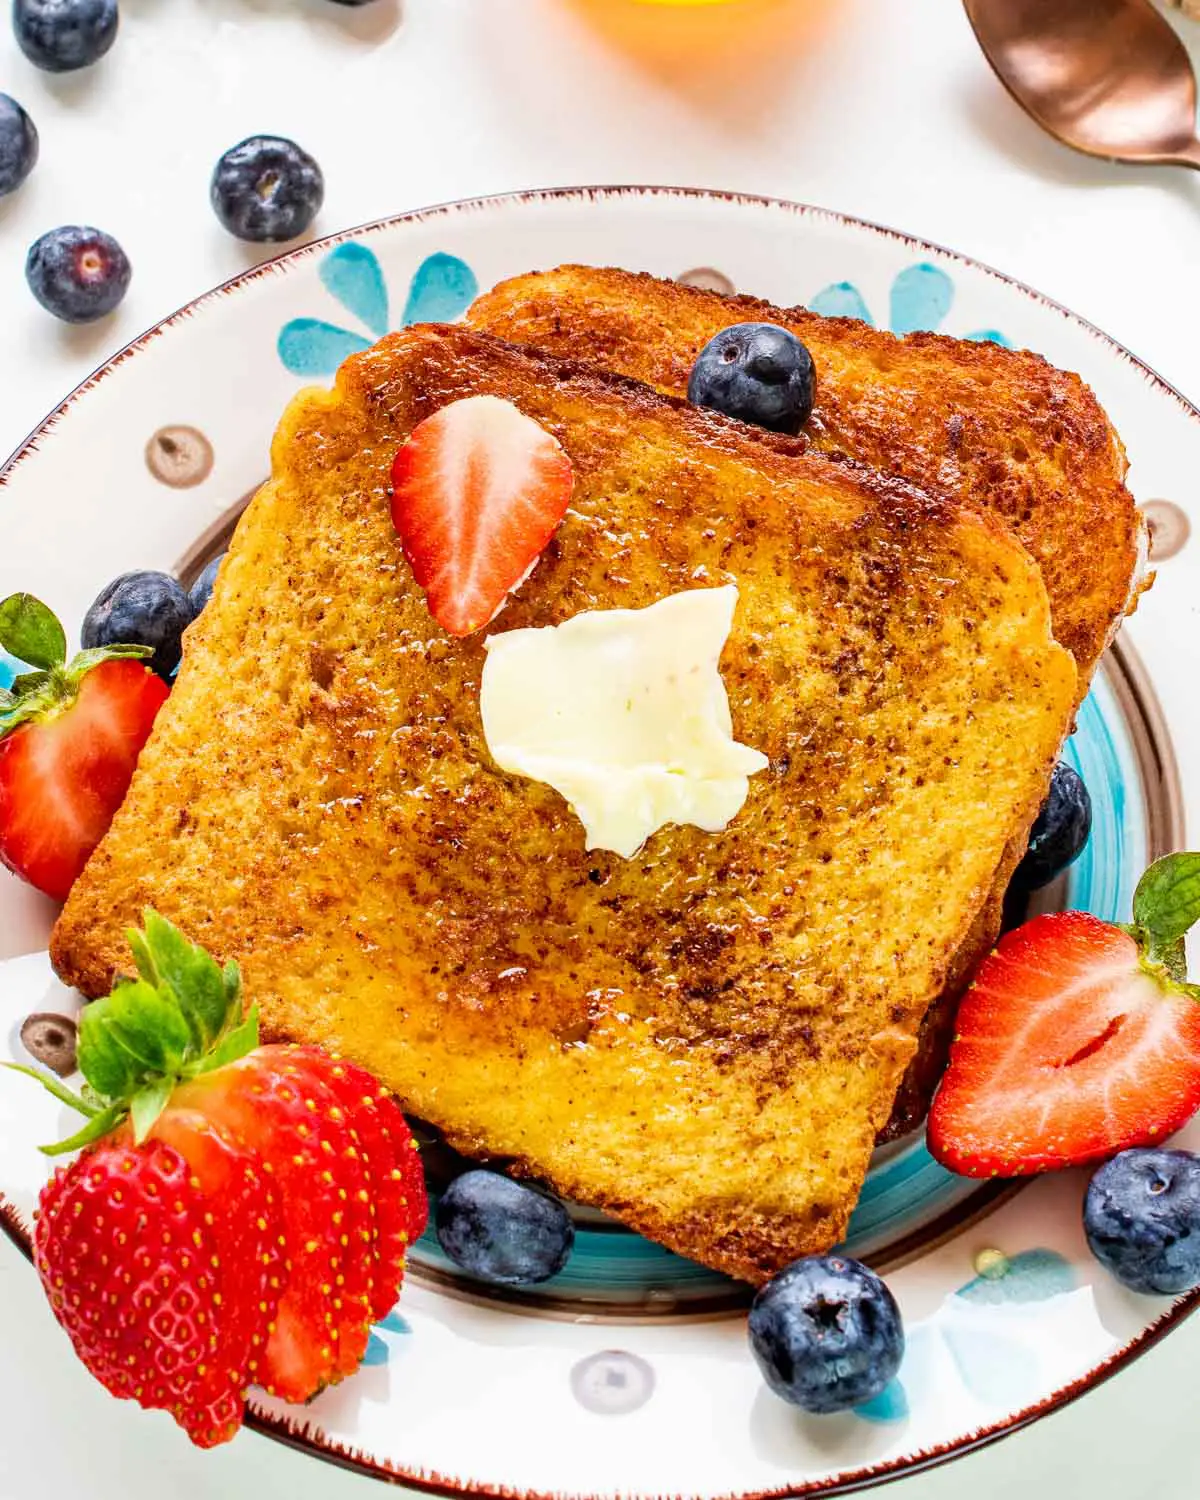 2 slices of french toast on a plate with butter and berries.